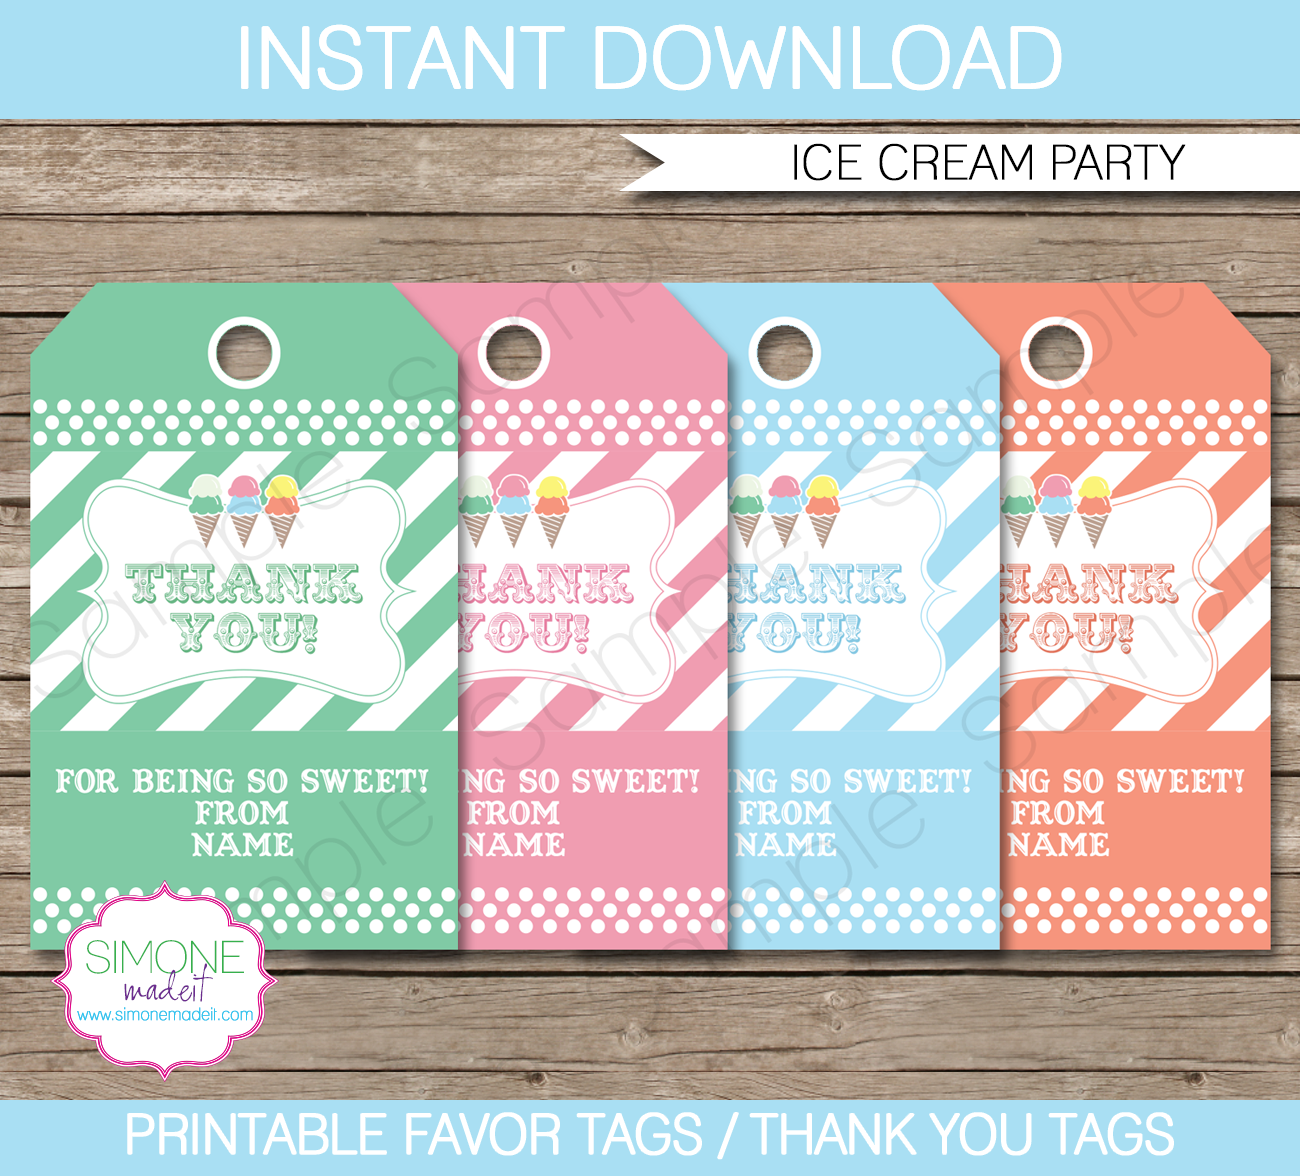 Ice Cream Party Favor Tags | Thank You Tags | Birthday Party | Editable DIY Template | $3.00 INSTANT DOWNLOAD via SIMONEmadeit.com